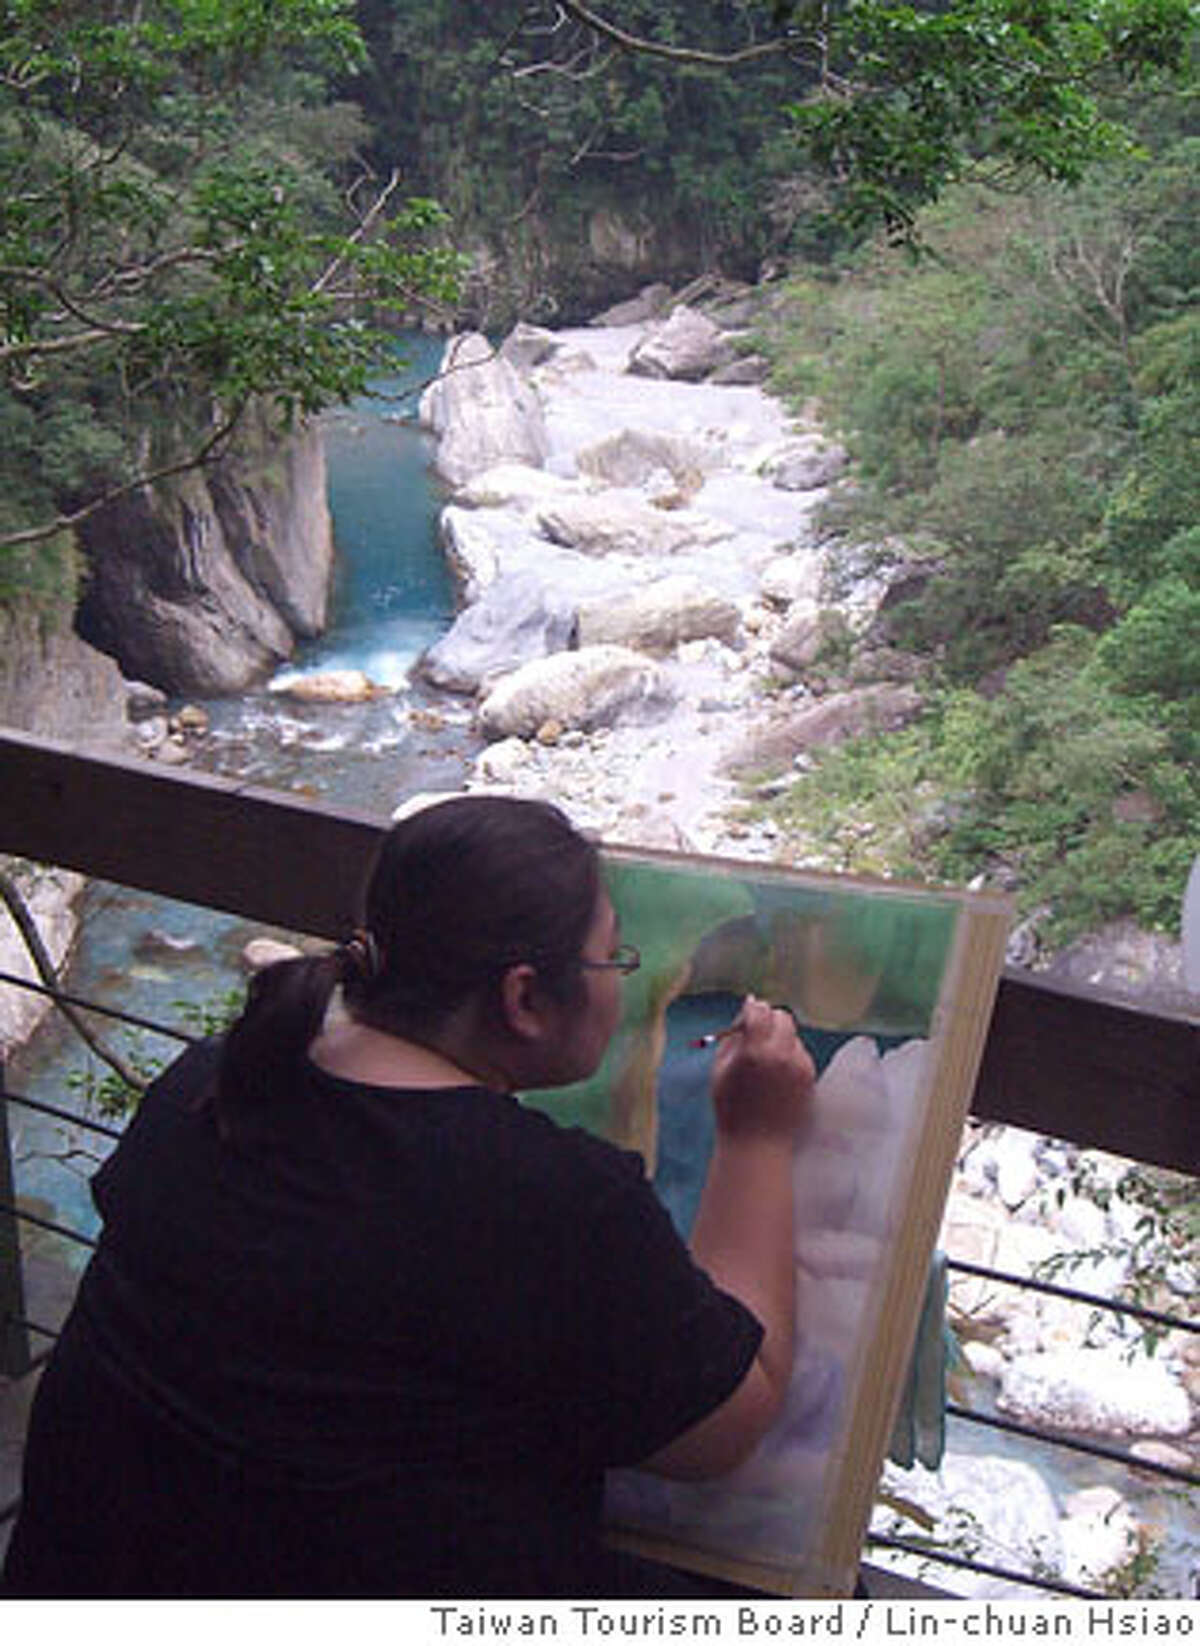 The Shakadang Trail in Taiwan's Taroko Gorge provides a picturesque subject for an artist. credit: Lin-chuan Hsiao / Taiwan Tourism Board